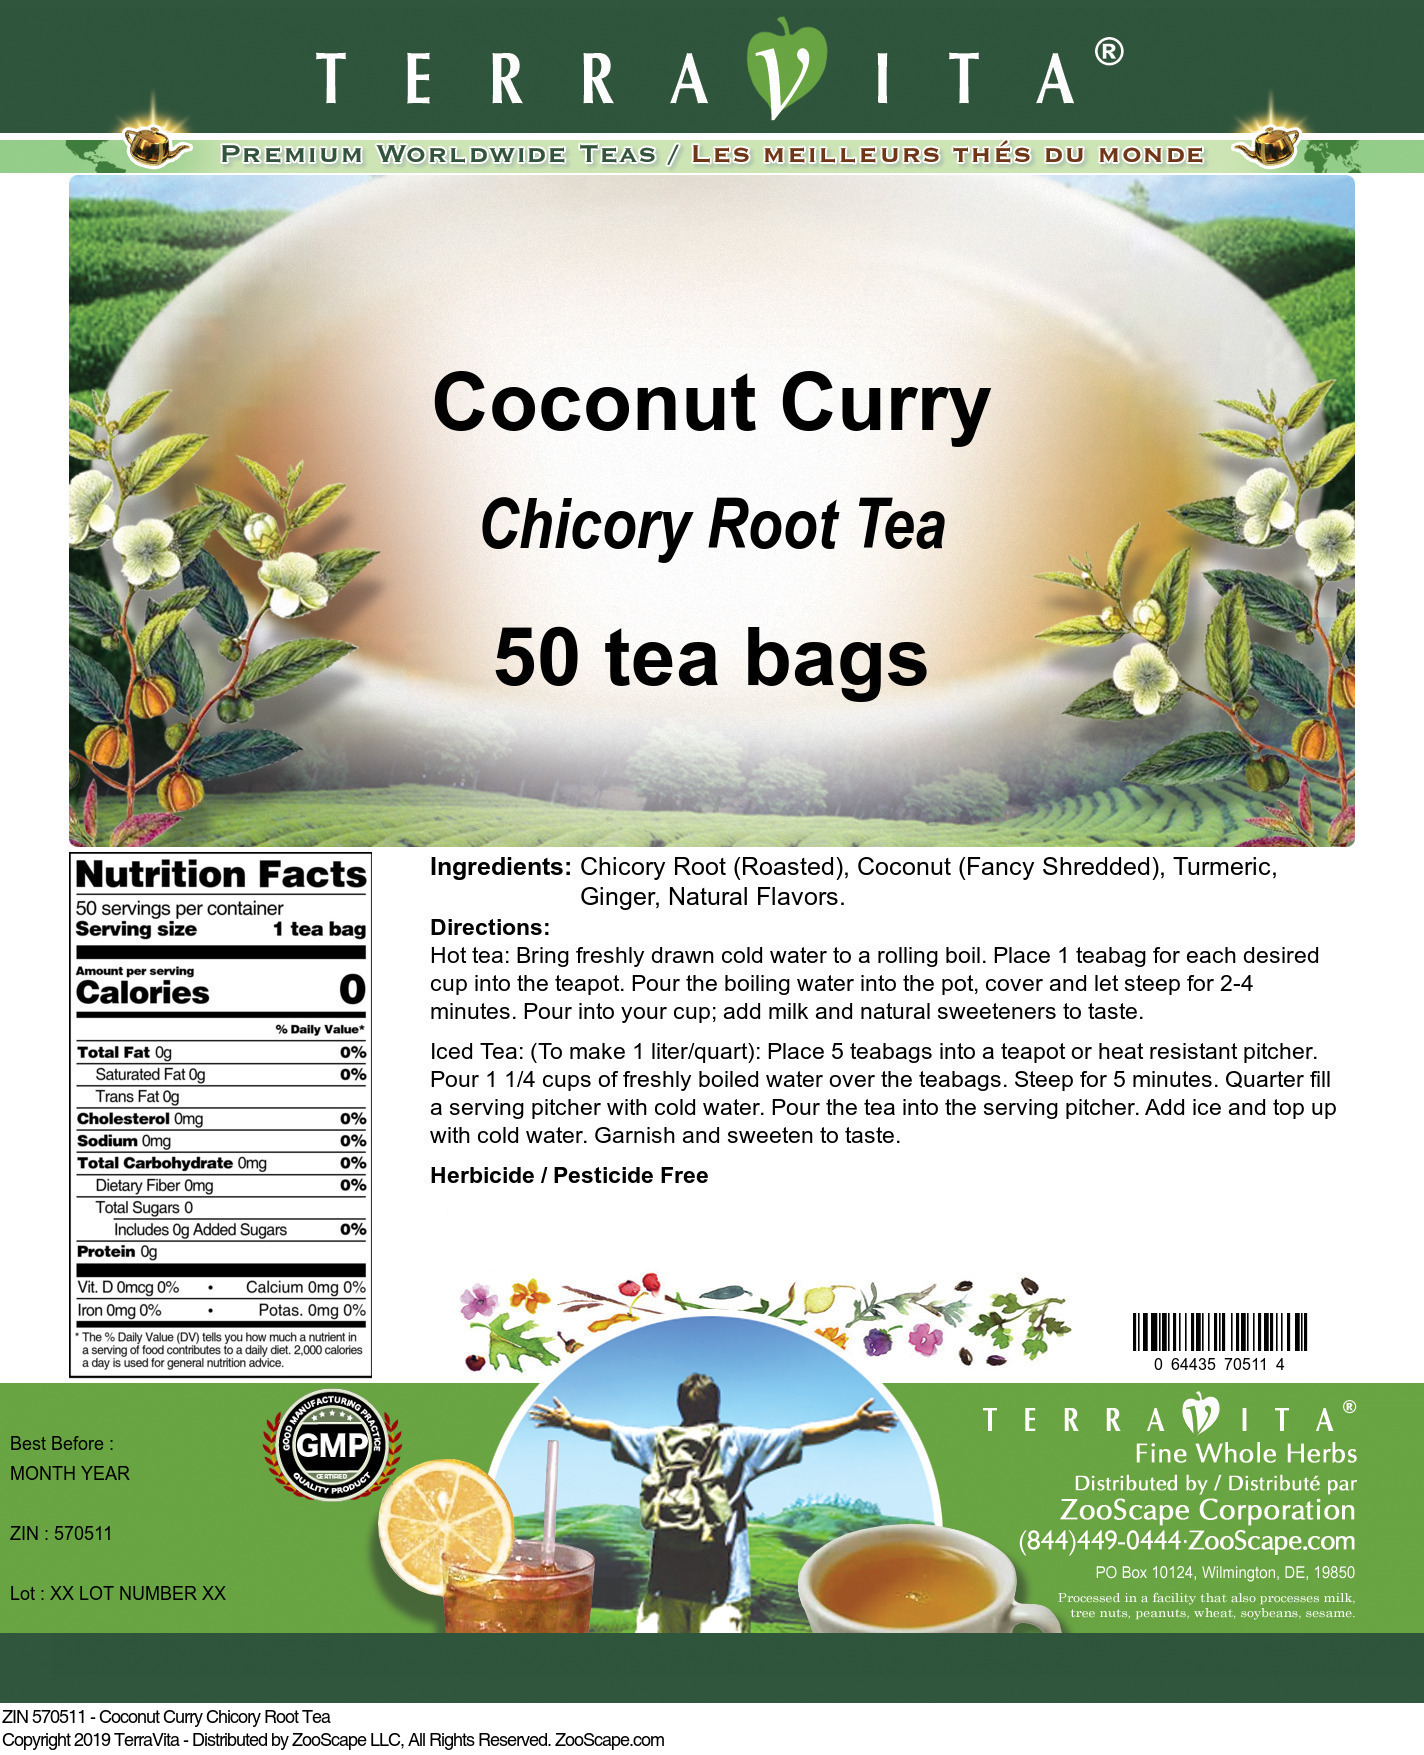 Coconut Curry Chicory Root Tea - Label